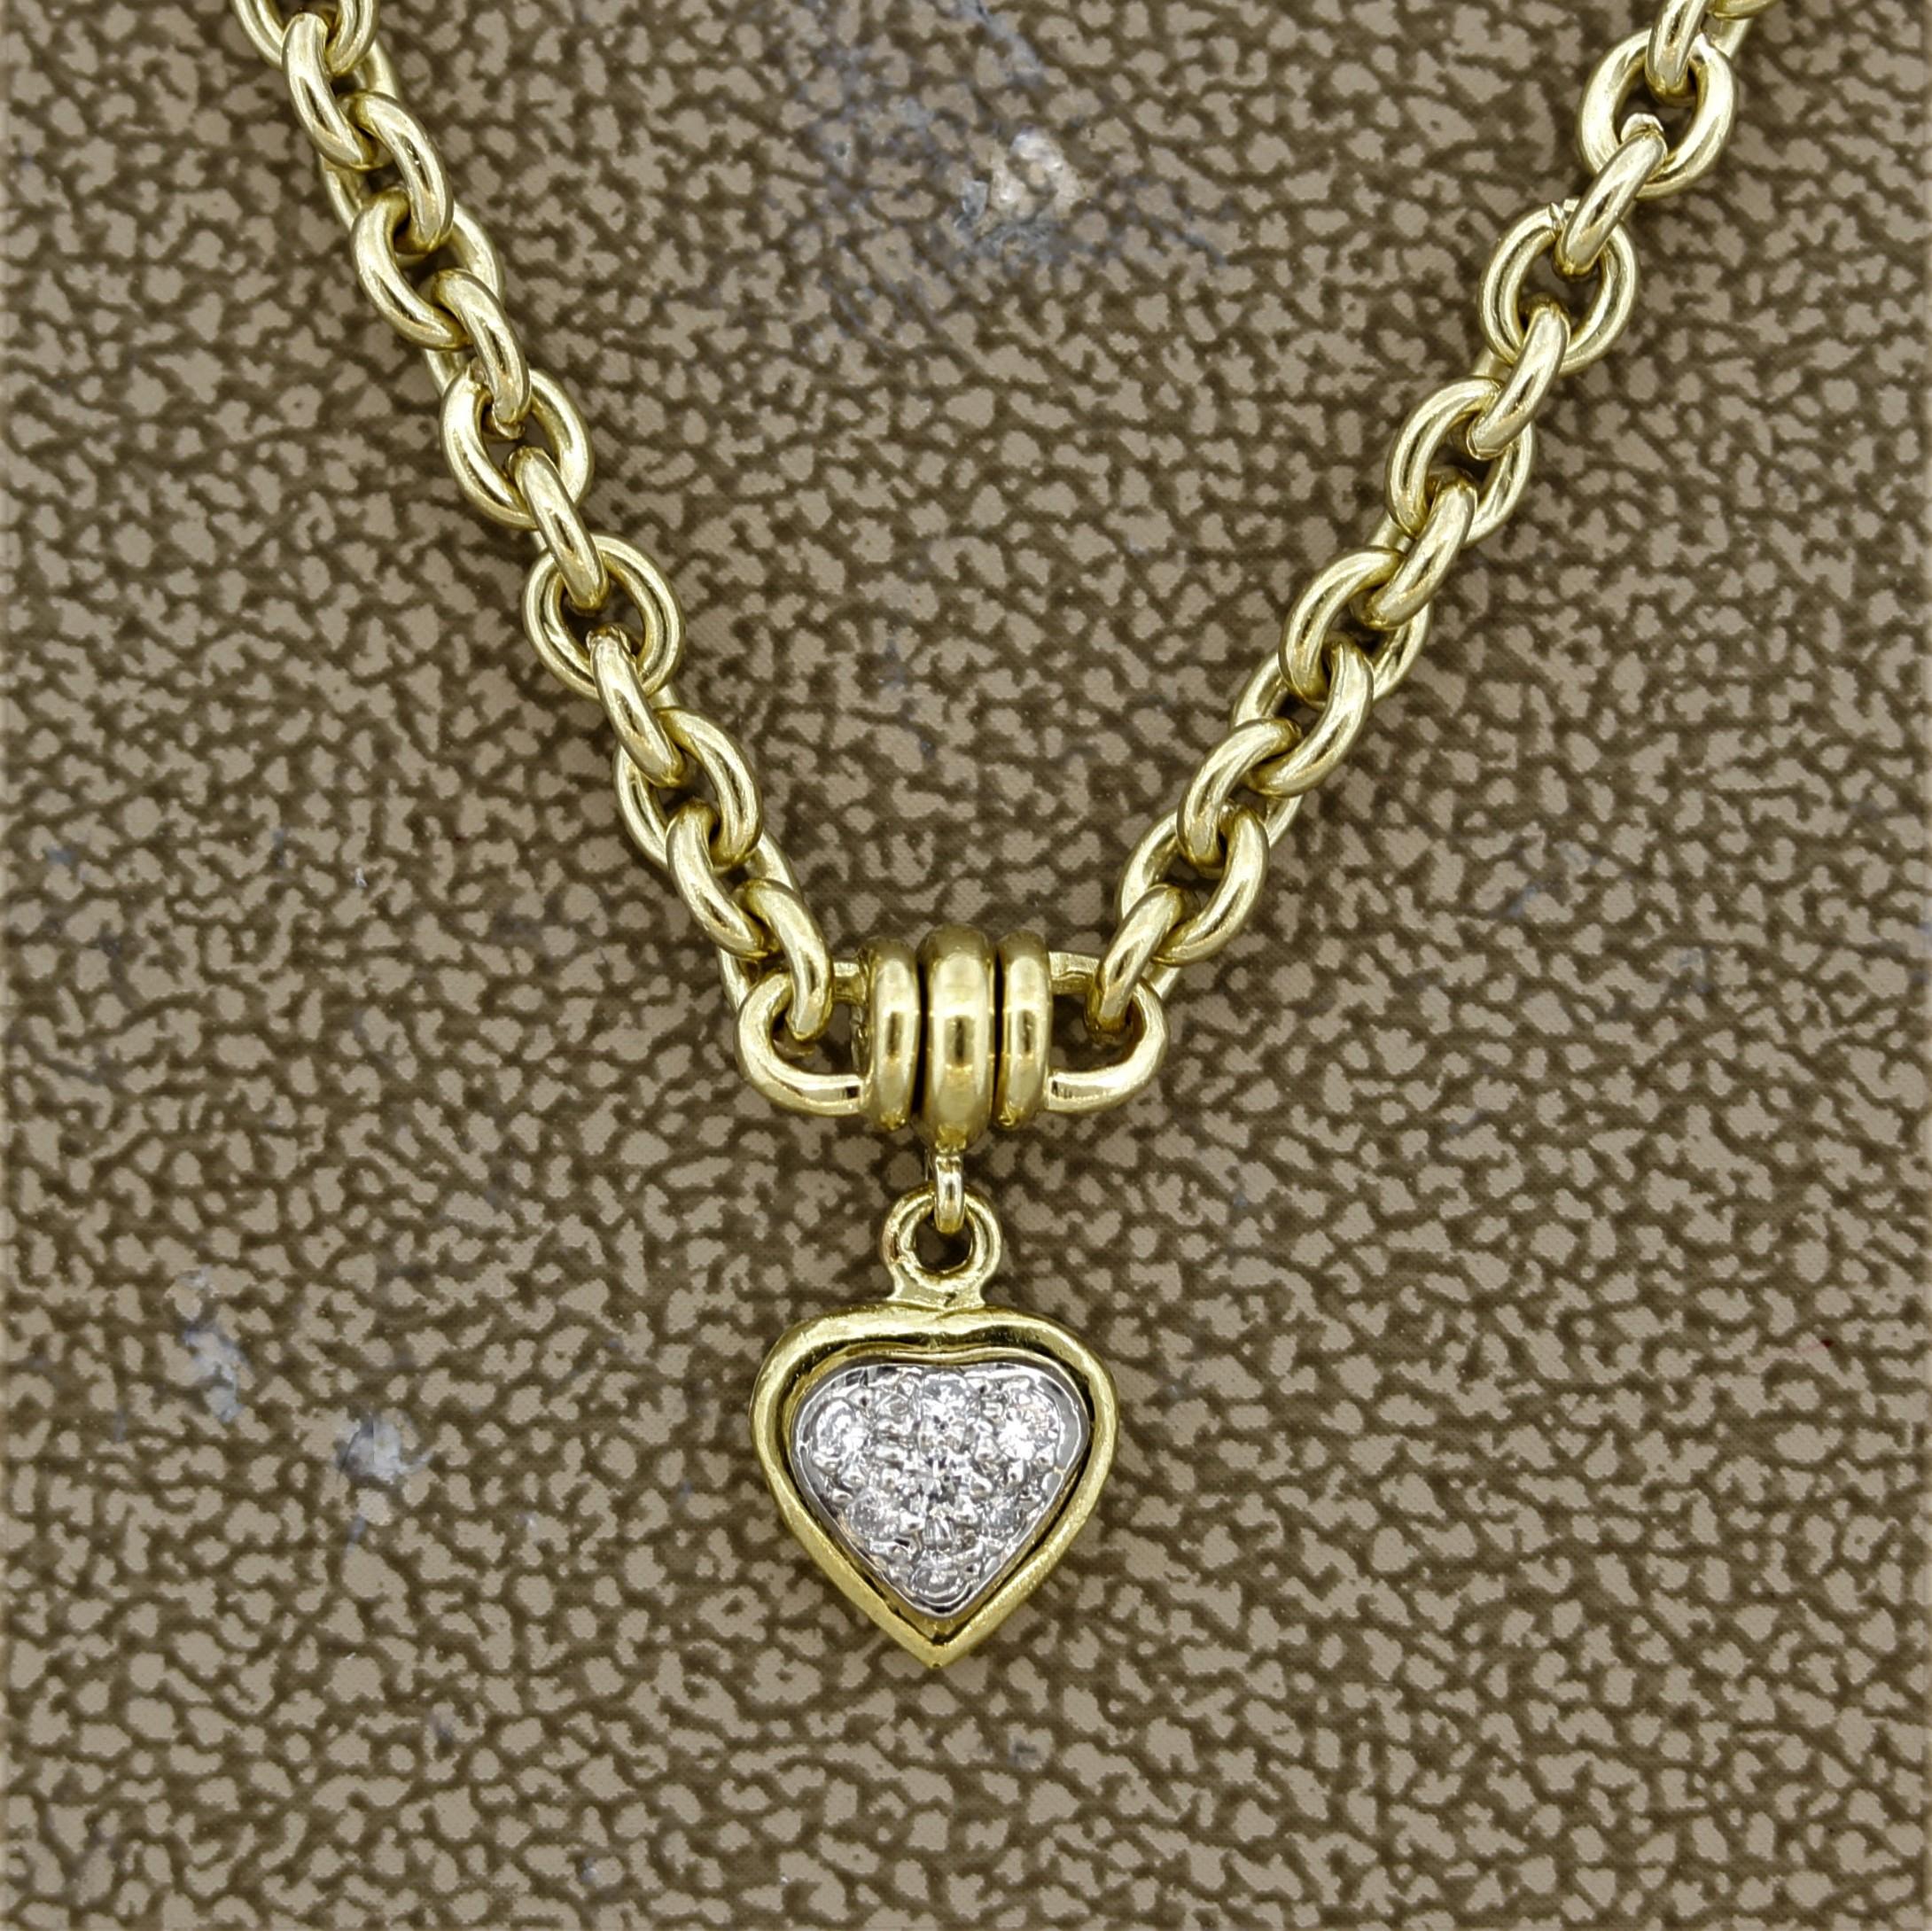 A simple yet stylish necklace featuring a heart with 0.10 carats of round brilliant cut diamonds. The piece is made in 18k yellow gold and will match every and any outfit.

Length: 16 inches